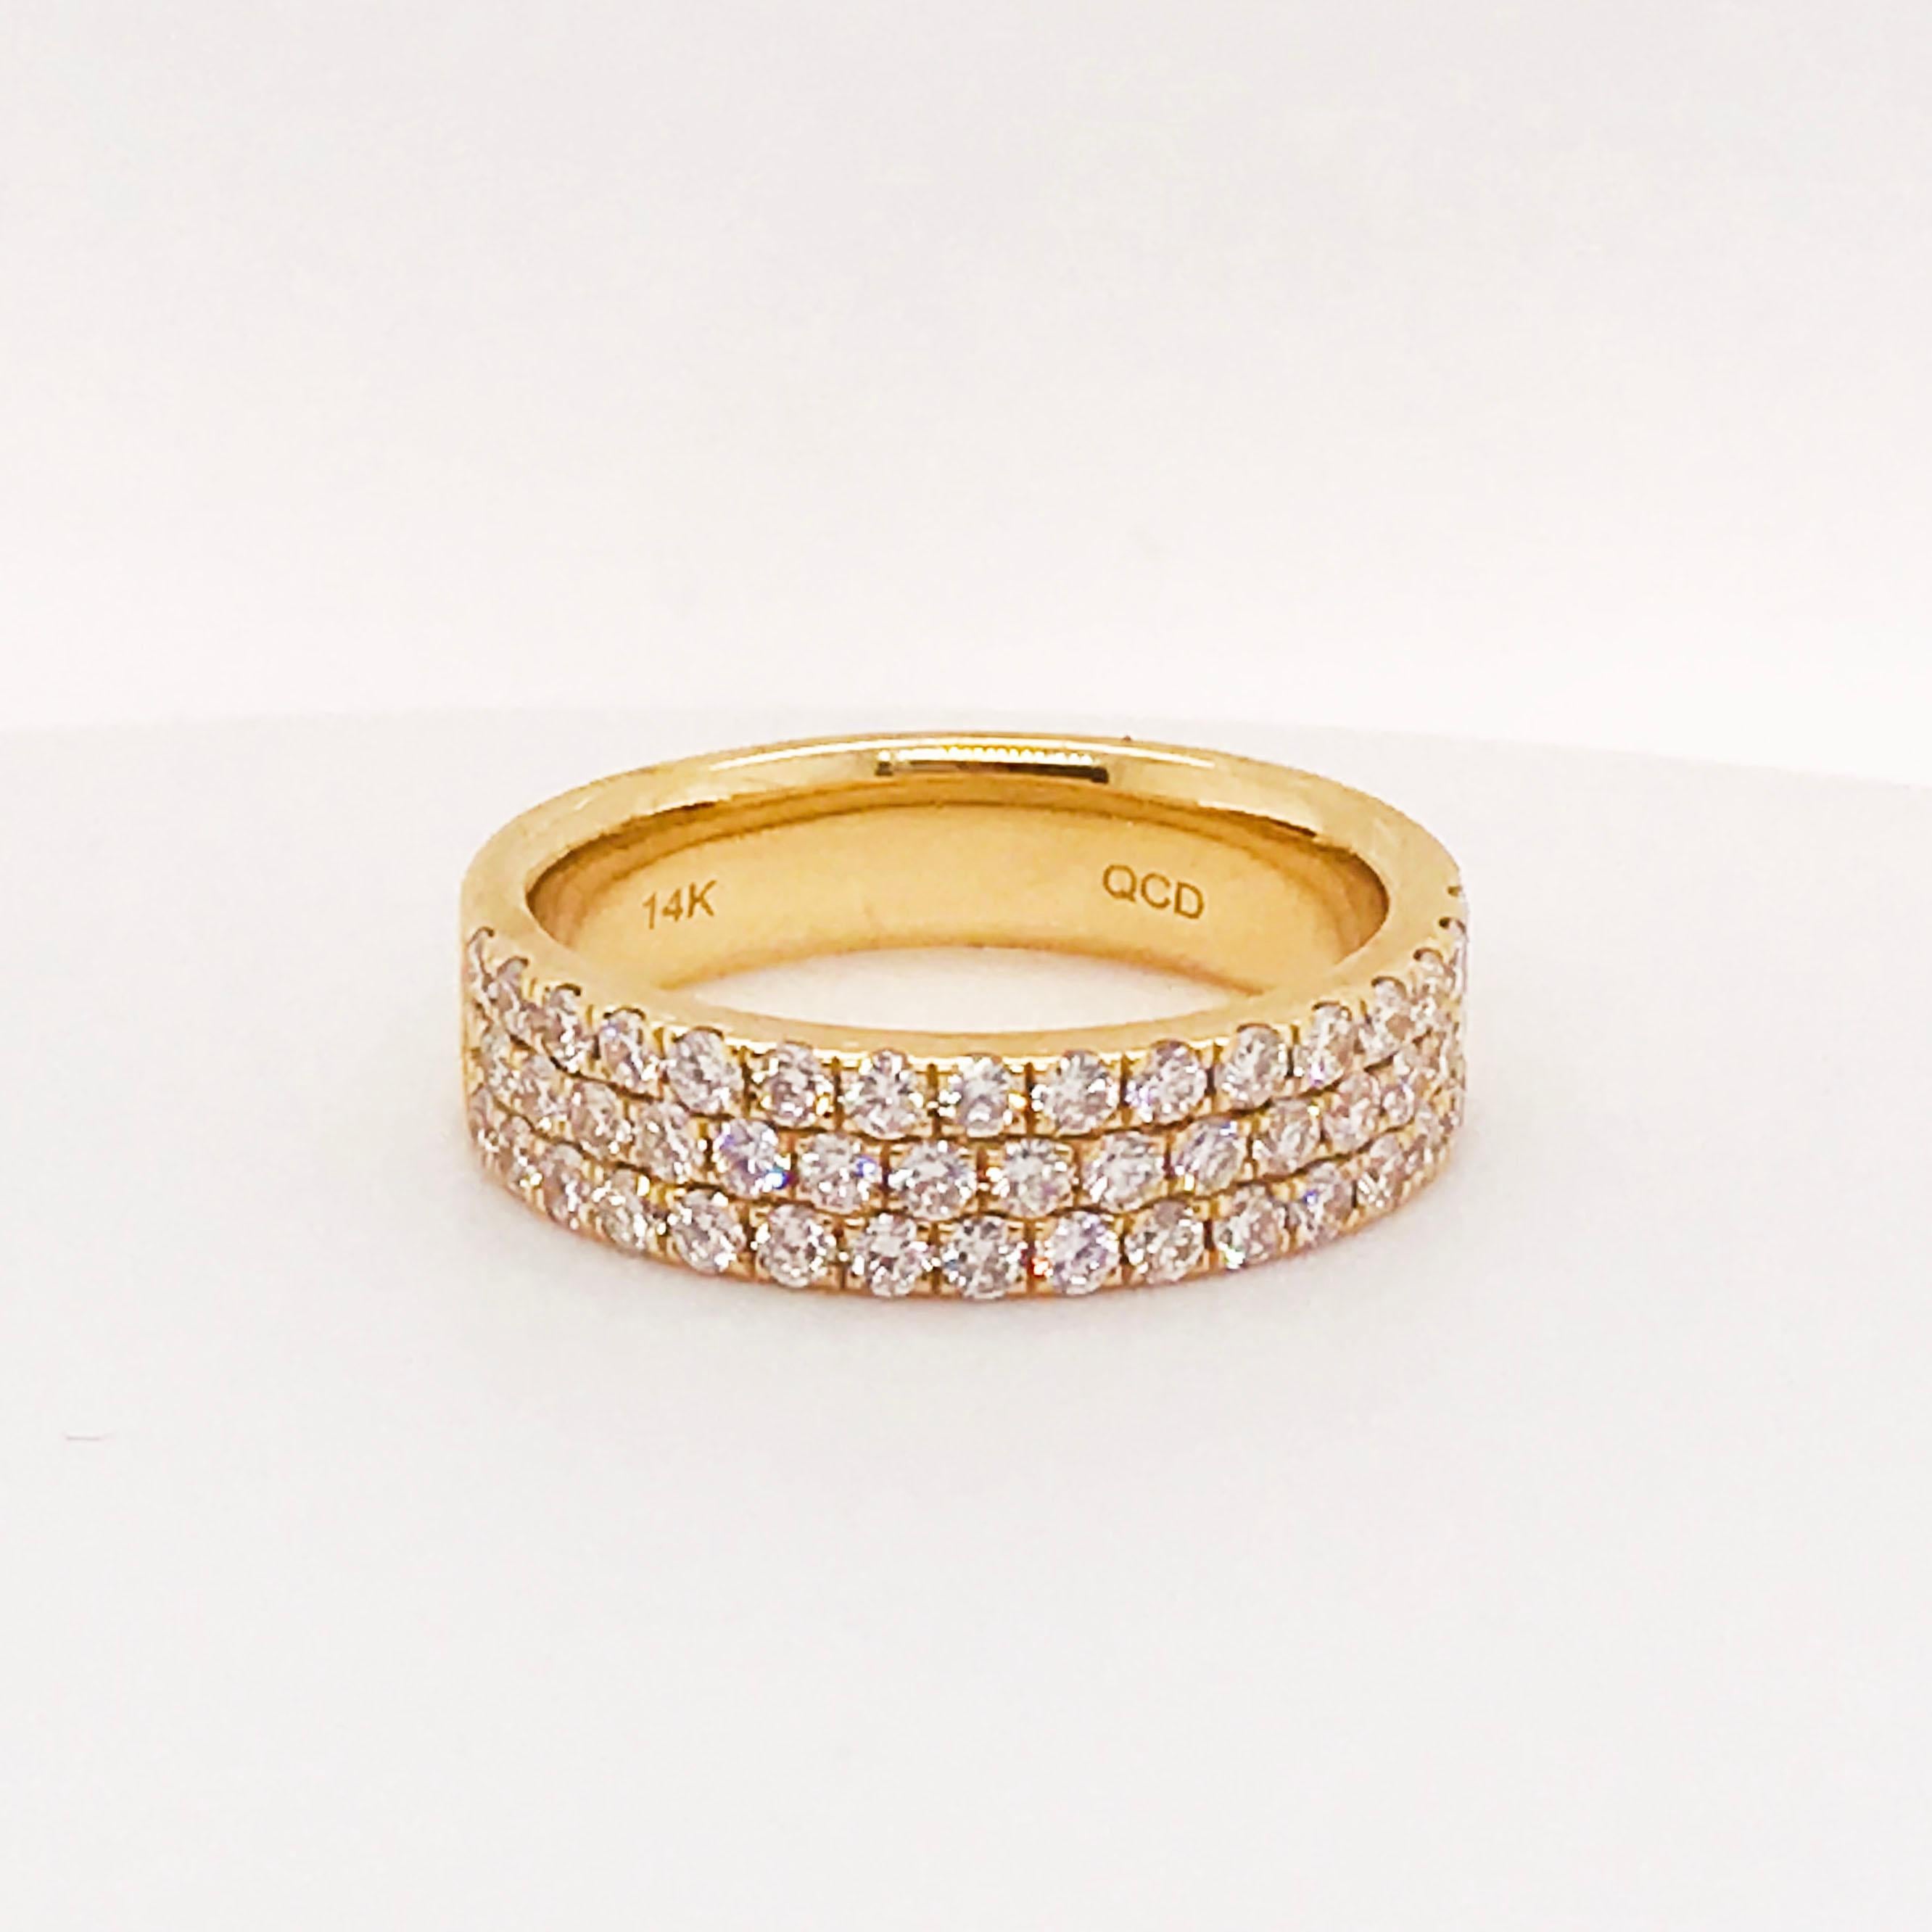 This is the perfect medium wide diamond ring!  It is made with three rows of beautiful diamonds that will sparkle across the room!  The band is very comfortable as the with this width you can still bend your finger-it is 5.4 millimeters wide. 
The